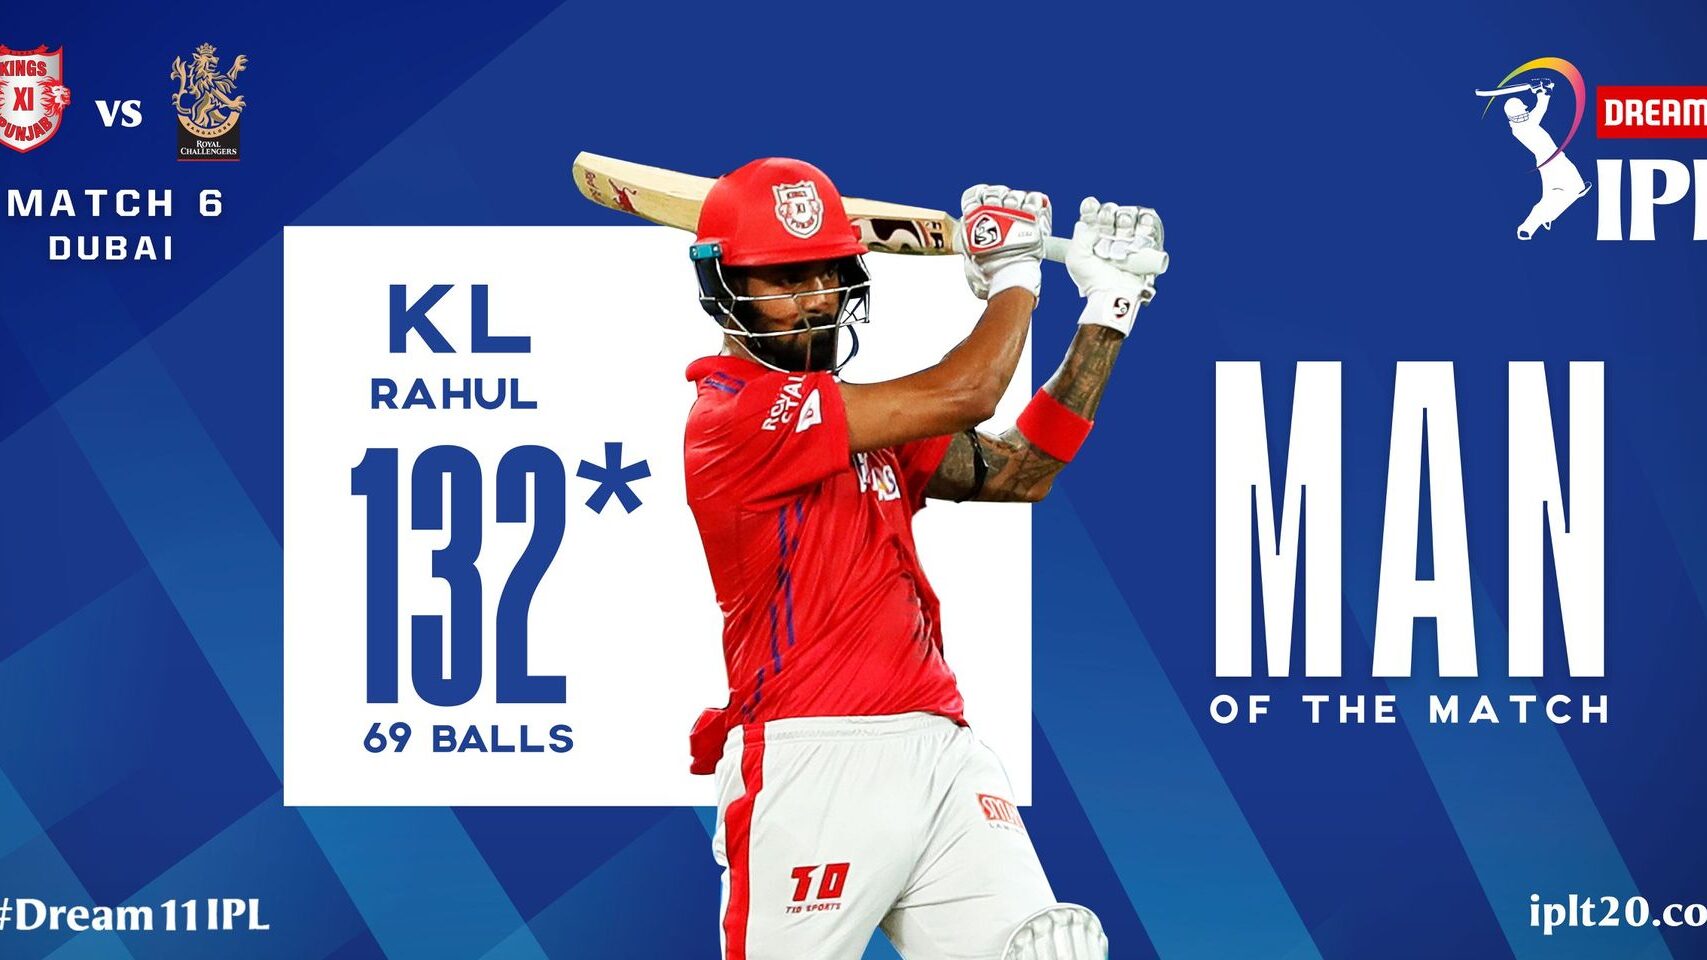 Lokesh Rahul has scored 132 runs which is the highest individual score in IPL by Indian.